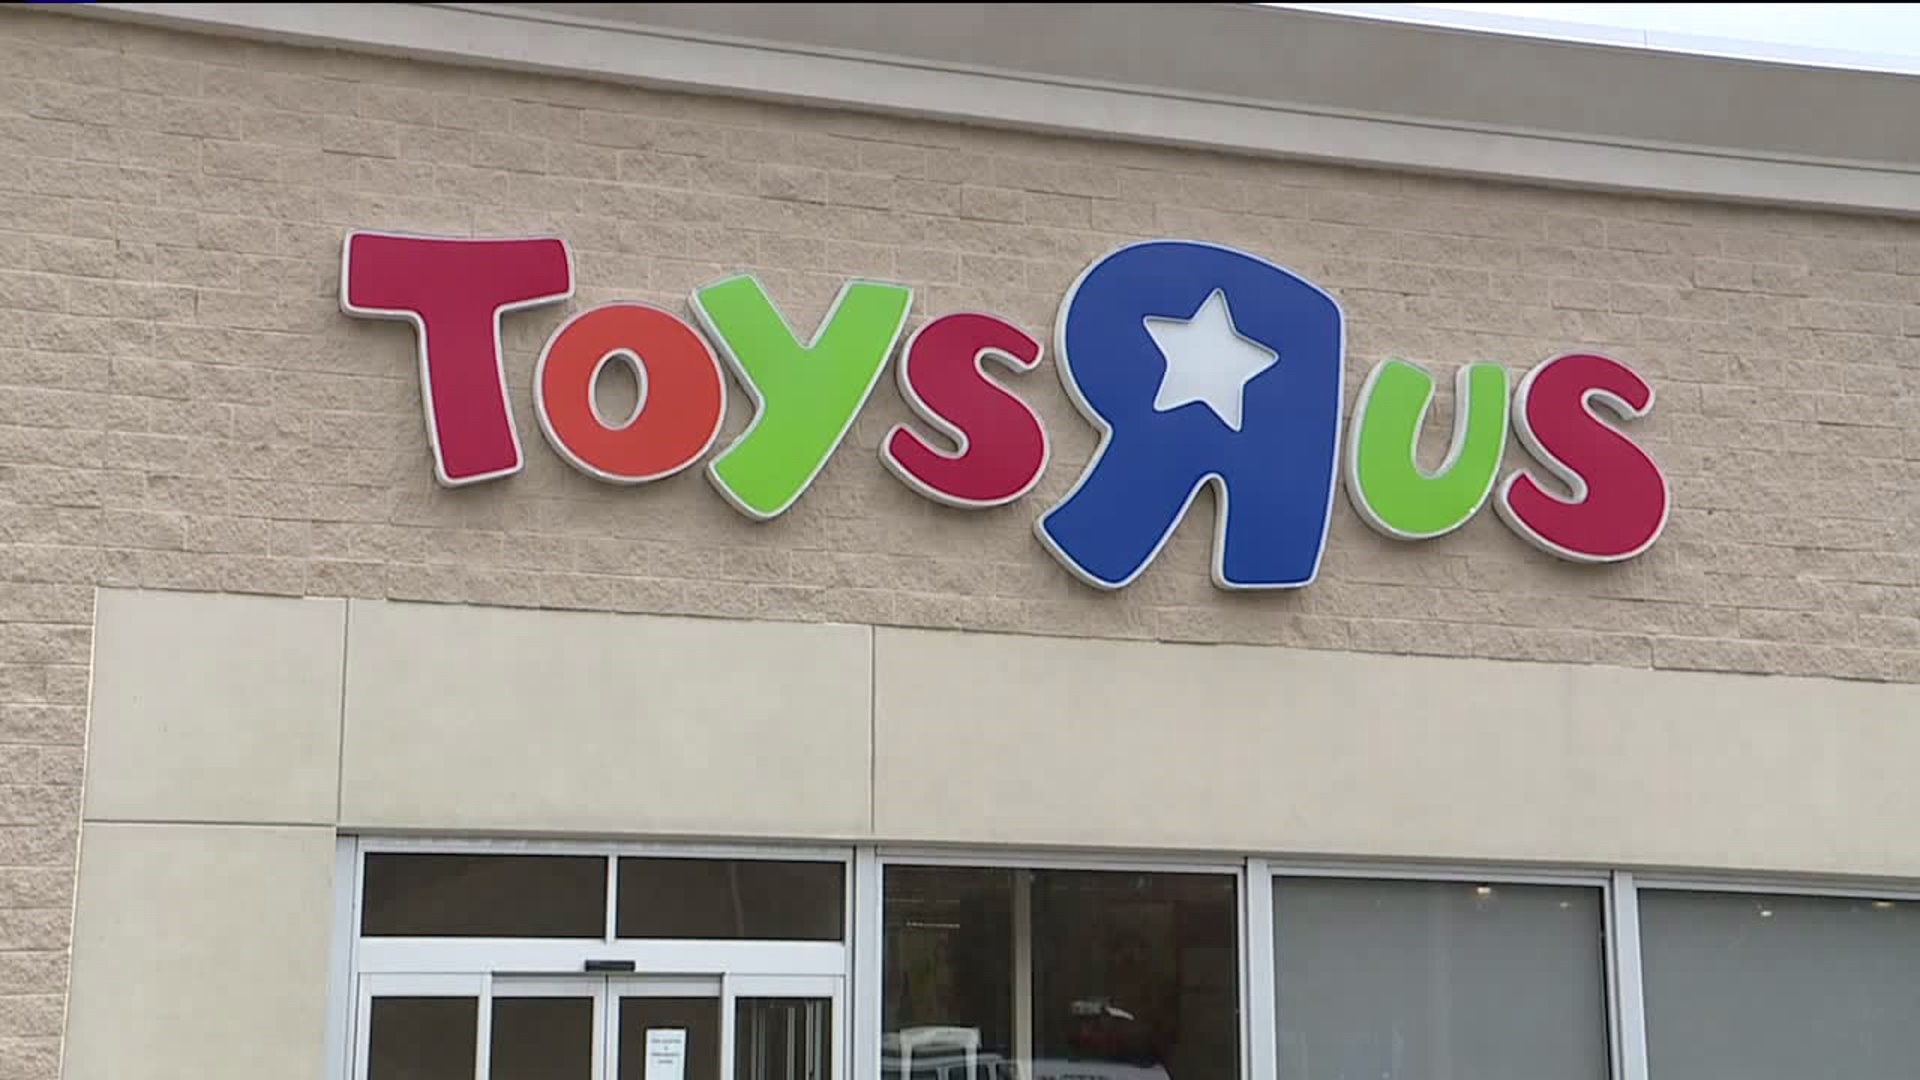 Retailer Has Plans for Old Toys 'R' Us Stores